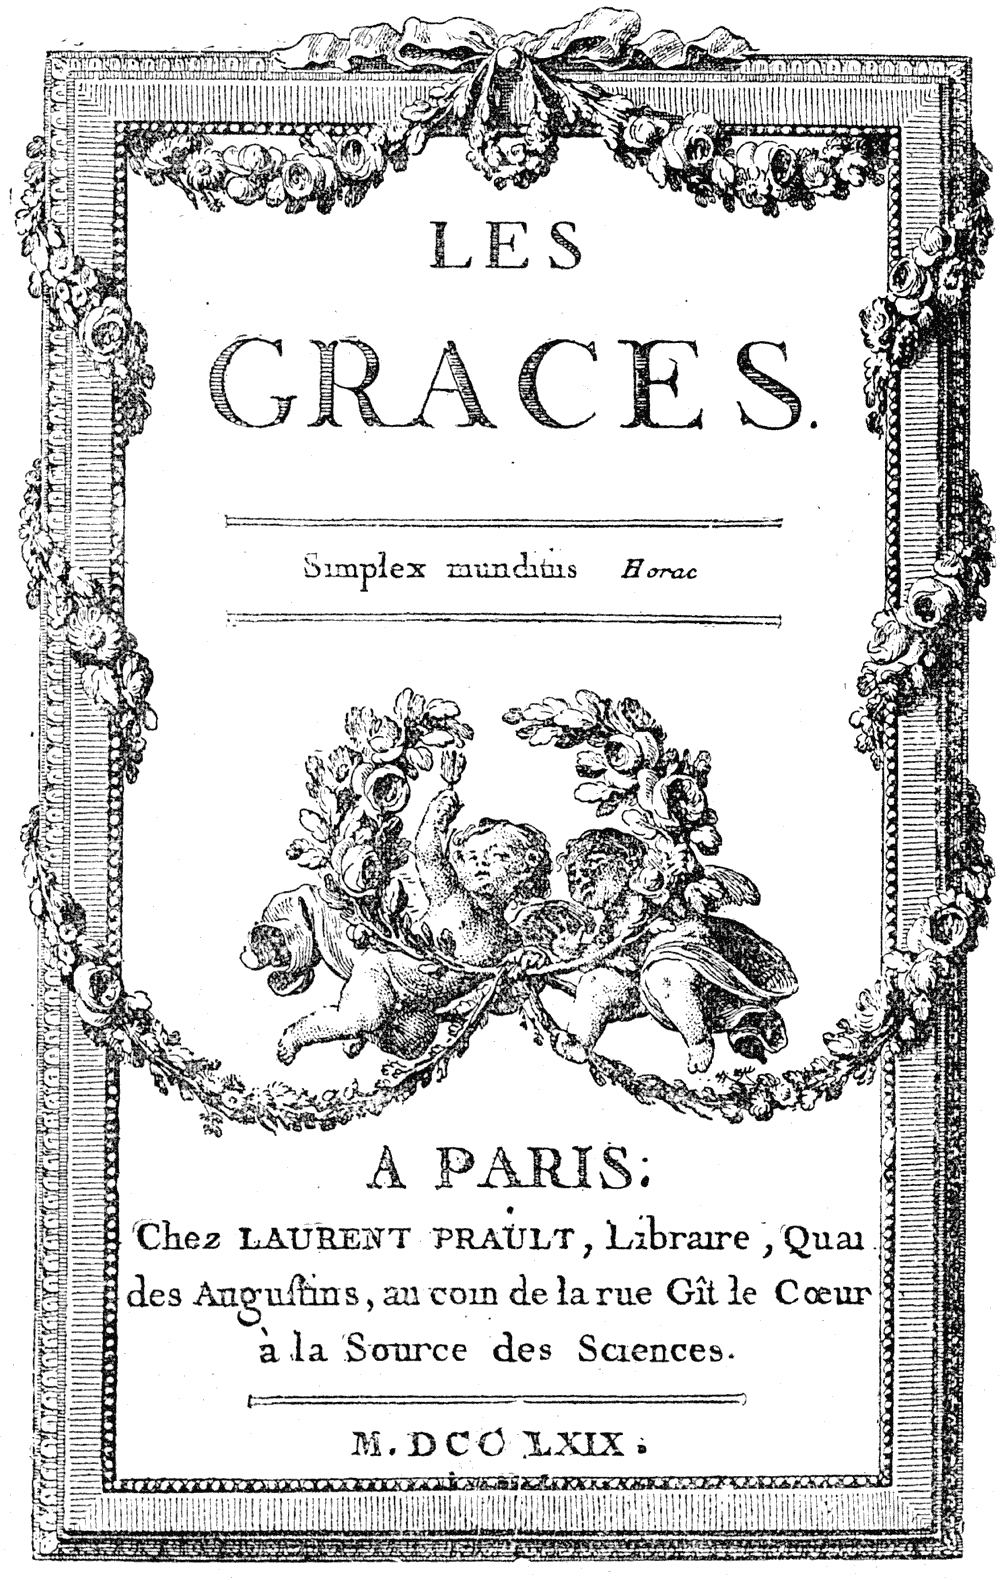 Title designed by Moreau le Jeune, the French illustrator, in 1769 for the publisher Prault. From Henri Bouchot 'The Printed Book' 1887, page 207, published size 8.7cm wide by 13.9cm high